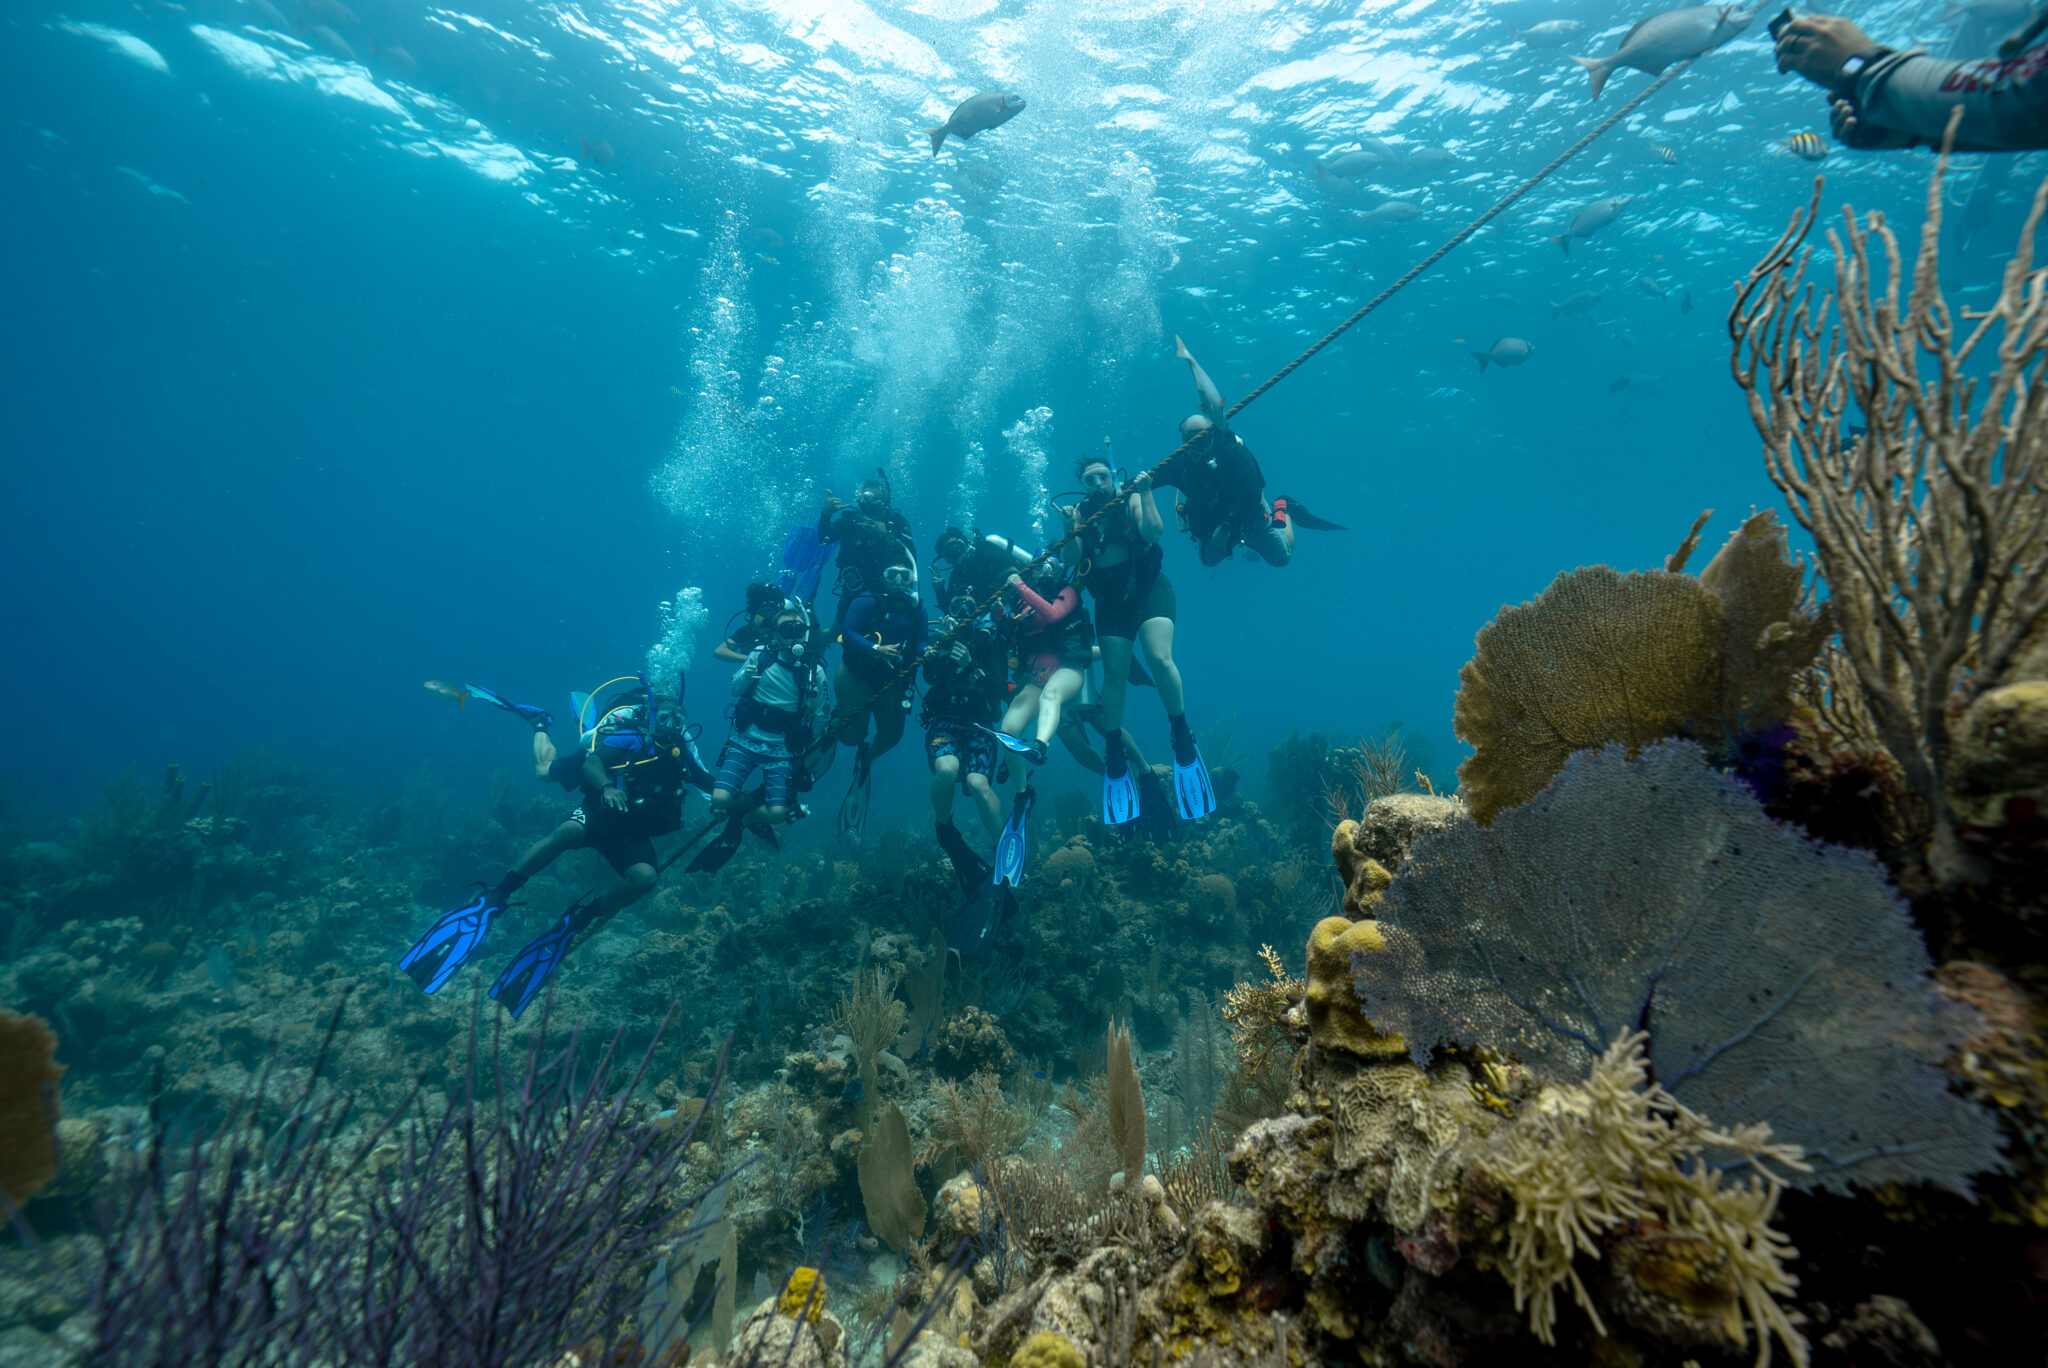 A group of scuba divers and PADI Club members pose for the camera underwater in Belize